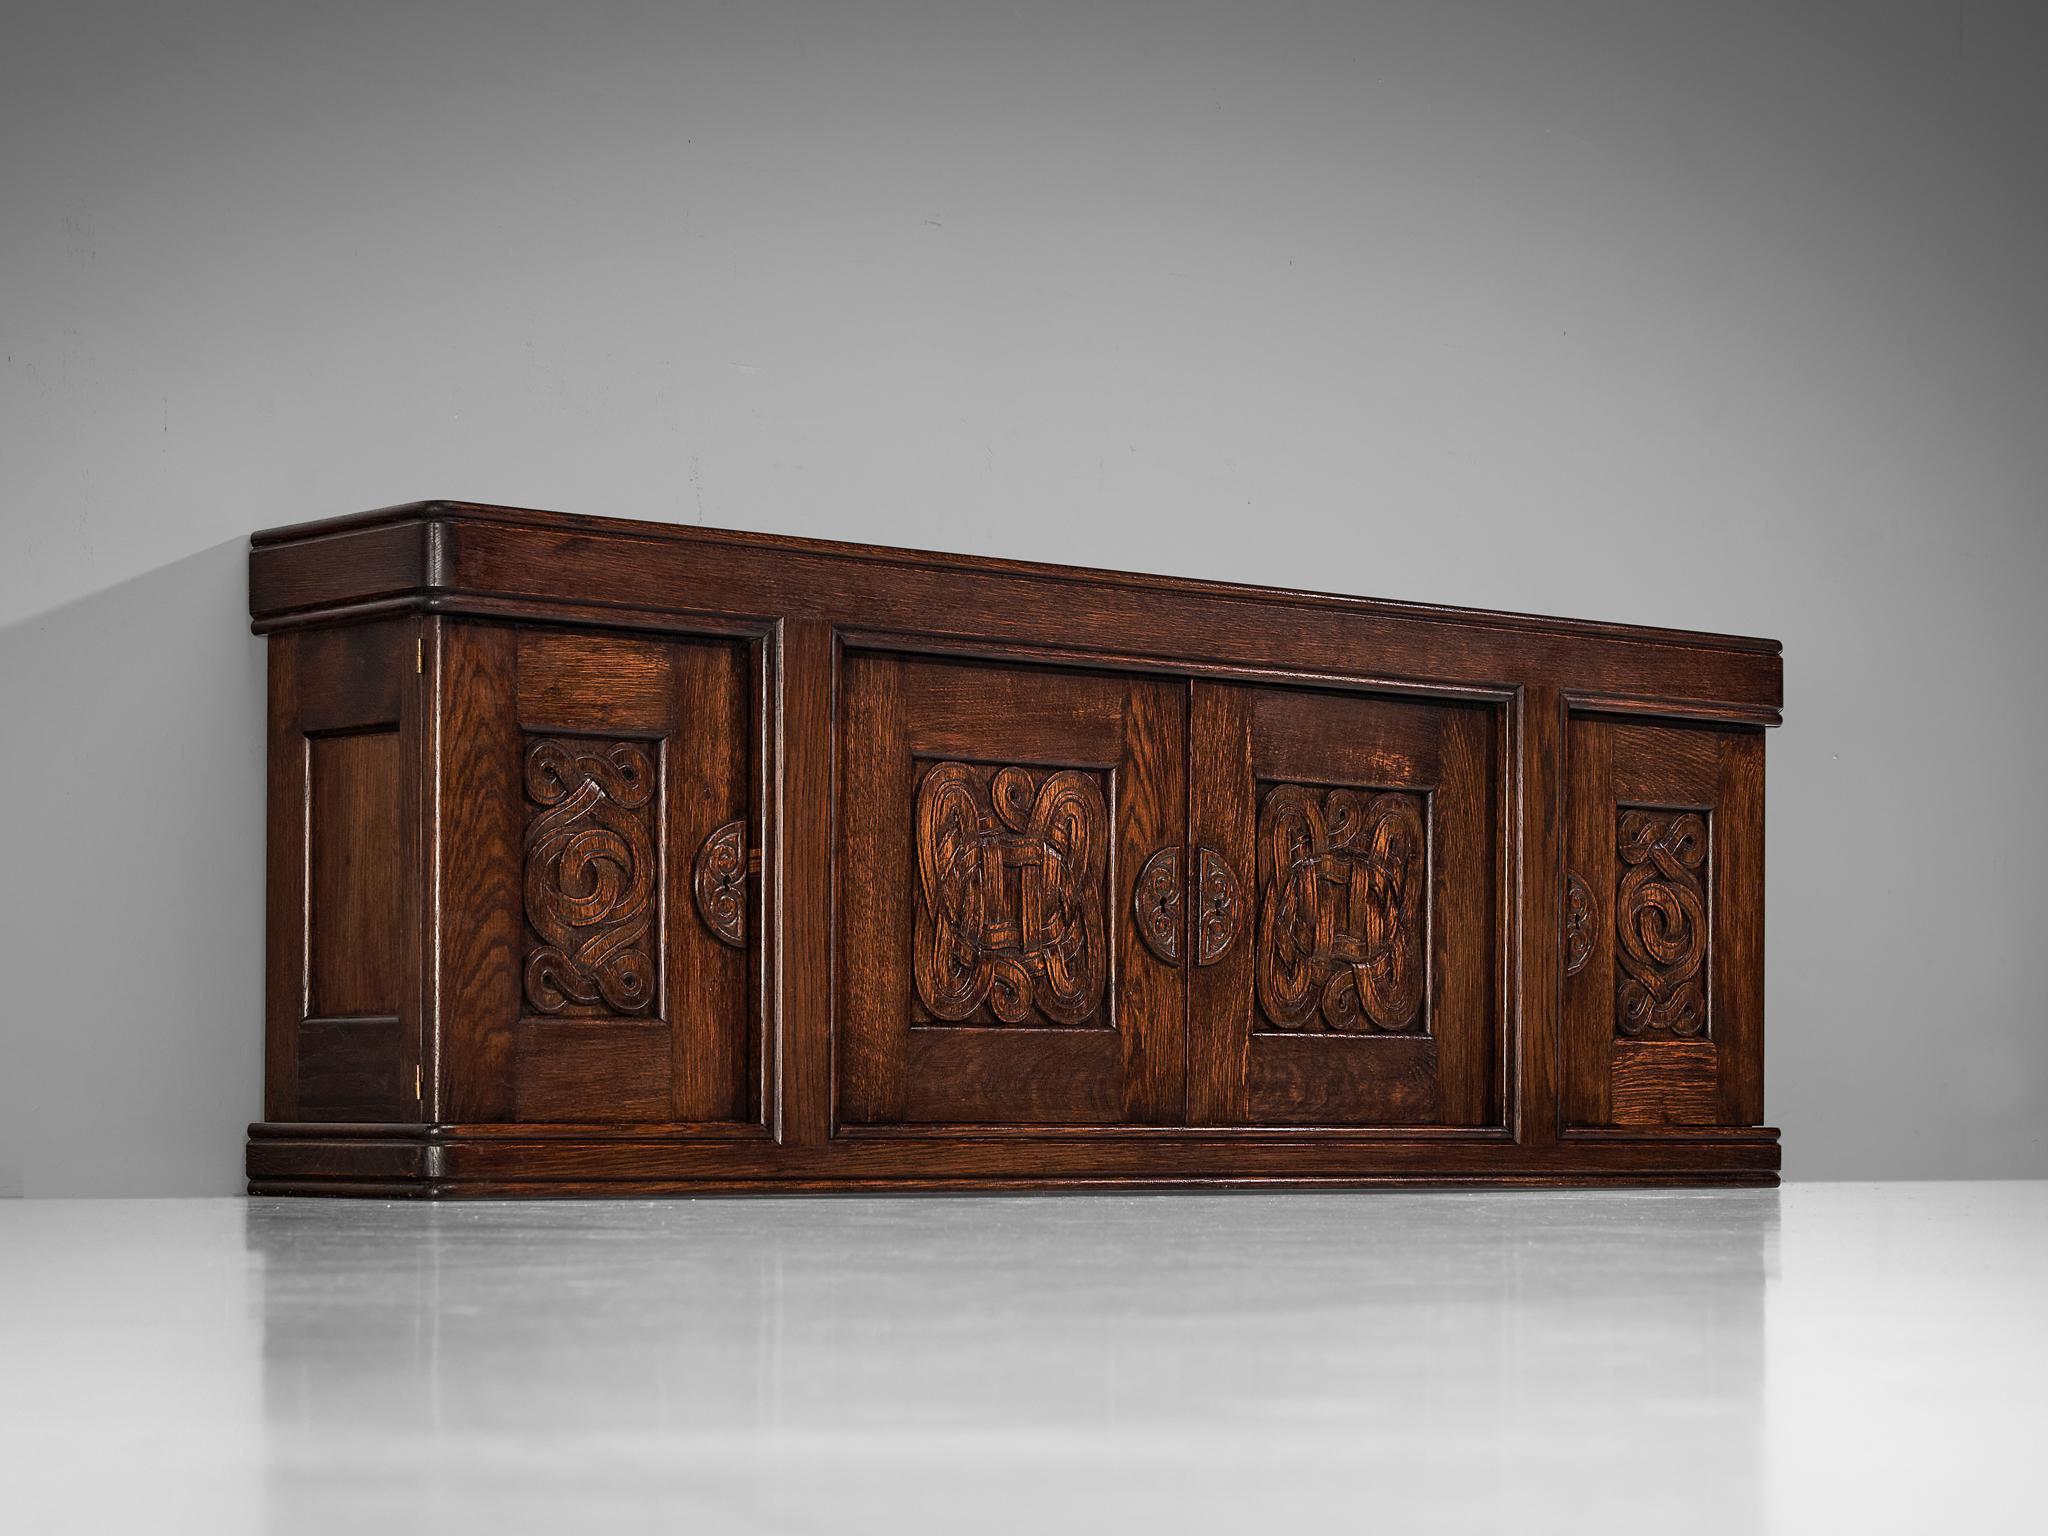 Joseph Savina, sideboard, oak, France, 1954

Designed by the Frenchman Joseph Savina, this cabinet is a testament to exquisite craftsmanship and profound artistry. The corpus is solidly built marked by distinct geometrical elements with a clear,